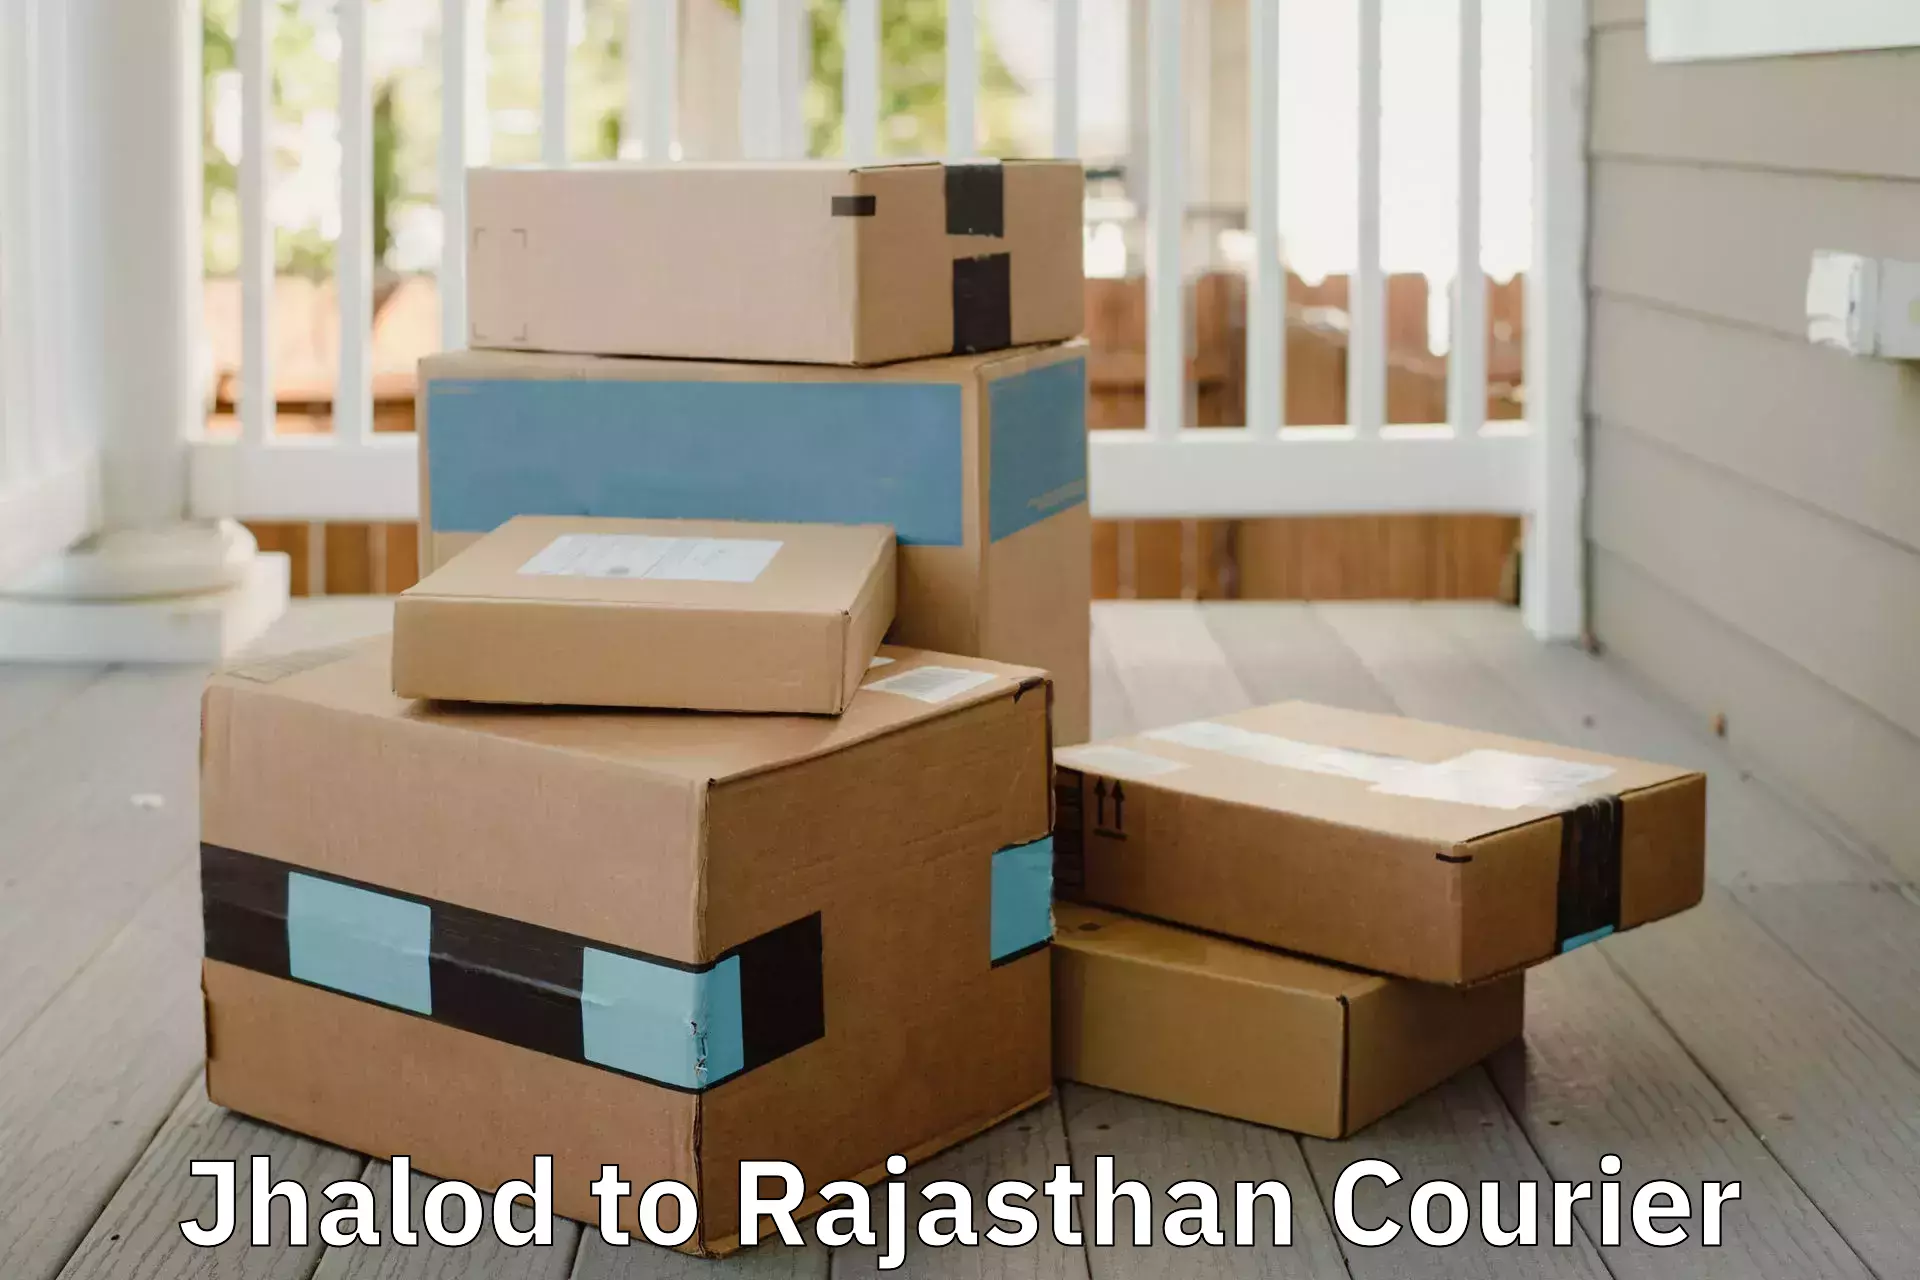 Efficient packing and moving Jhalod to Piparcity